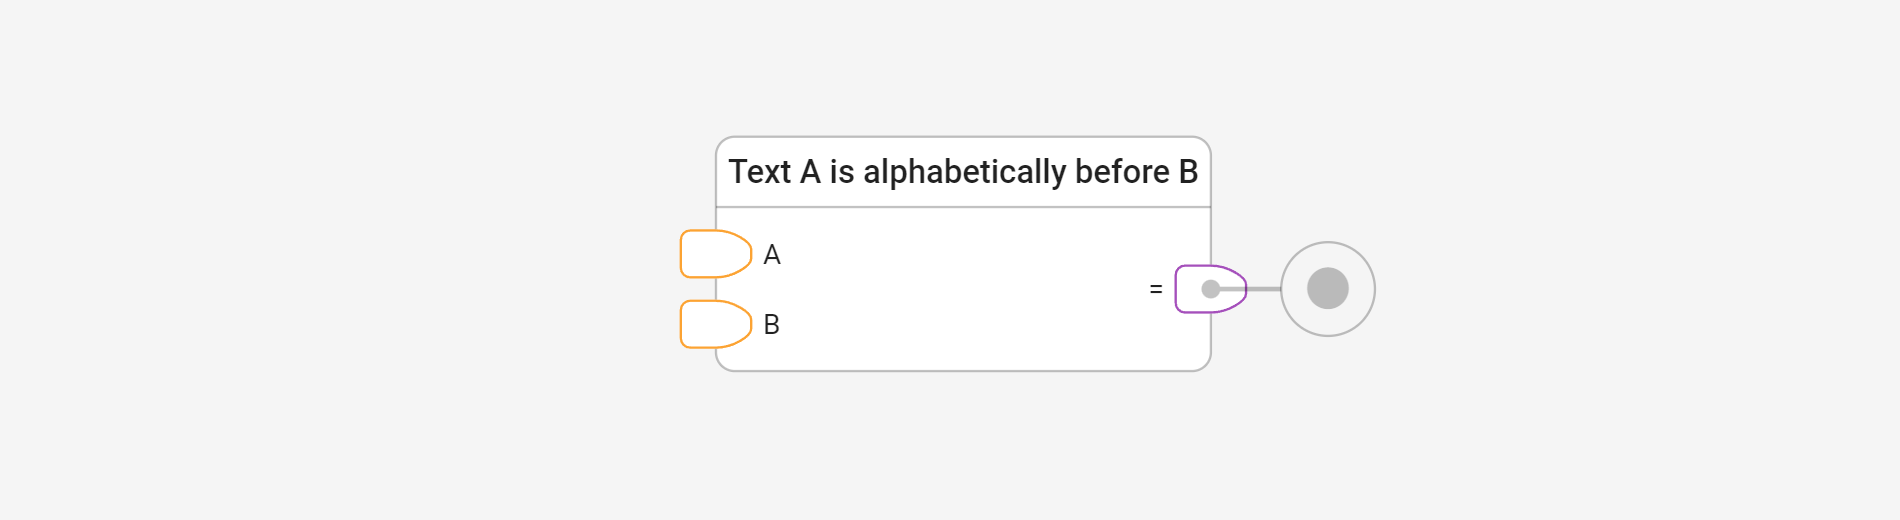 Check order using A is alphabetically before B